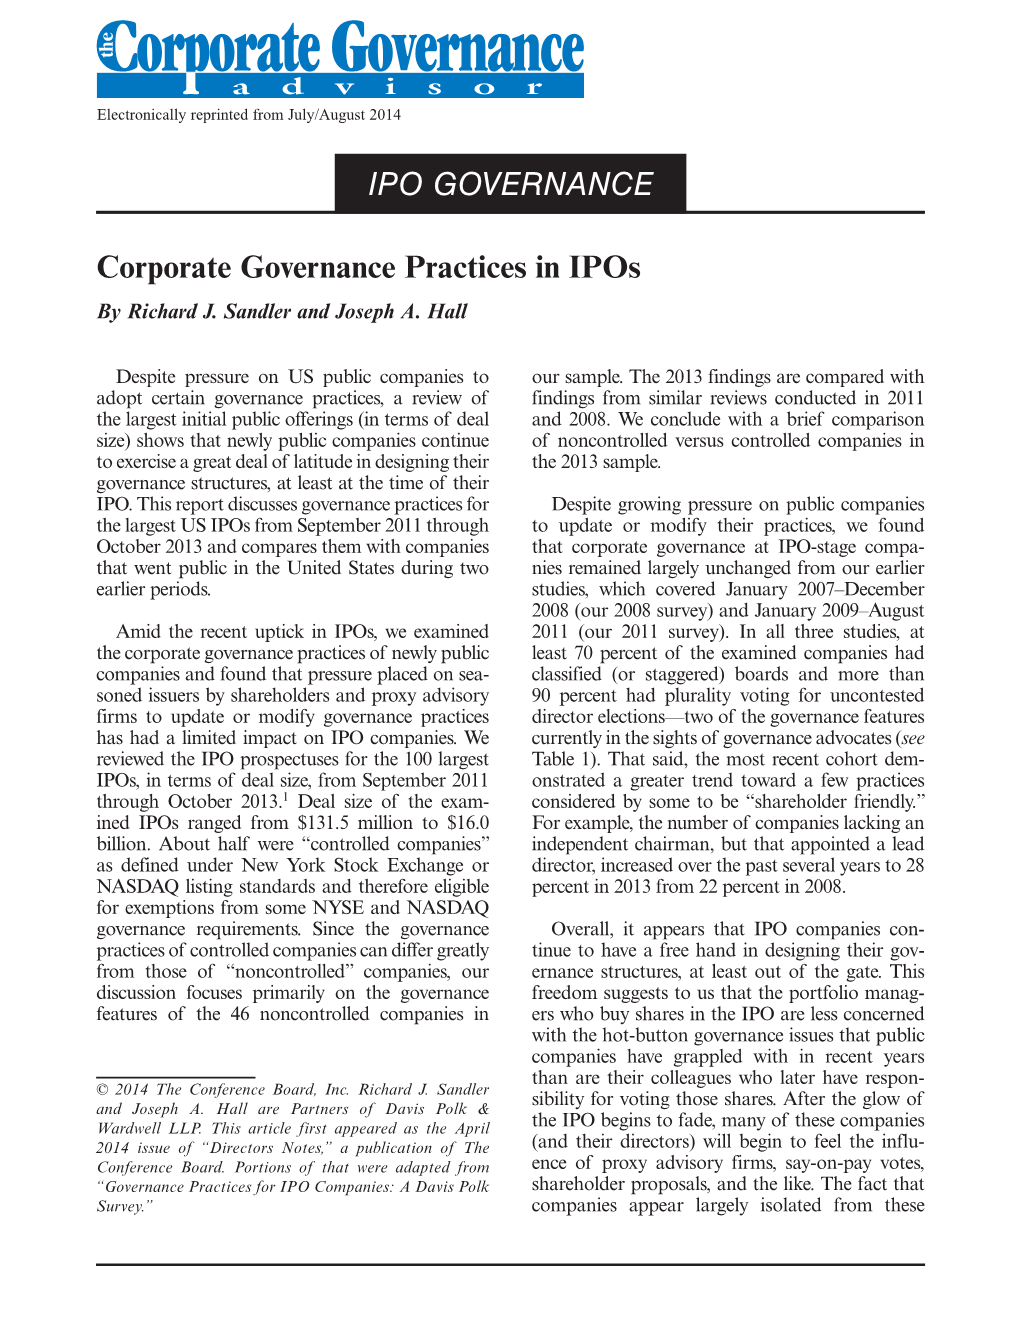 Corporate Governance Practices in Ipos by Richard J